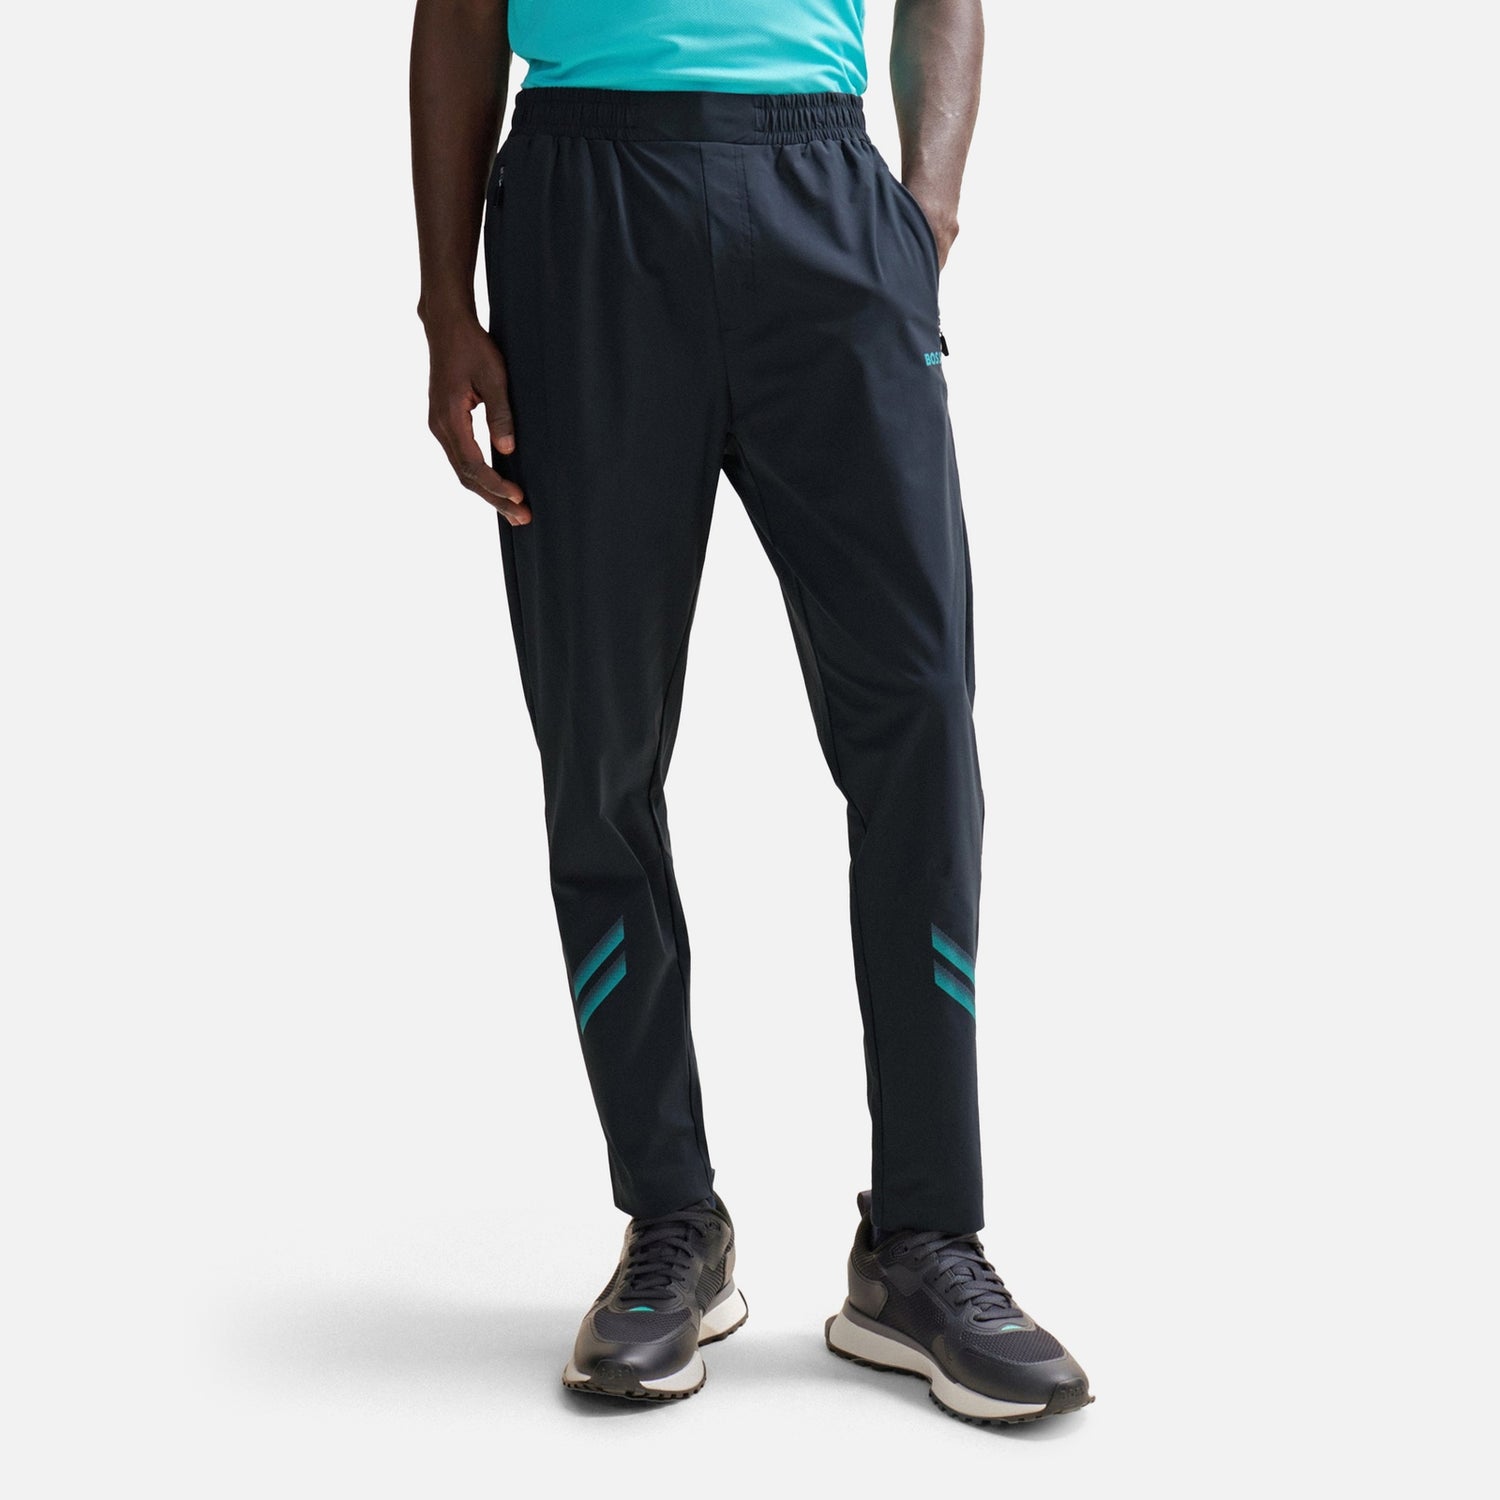 BOSS Green Hicon Active 1 Shell Sweatpants - S